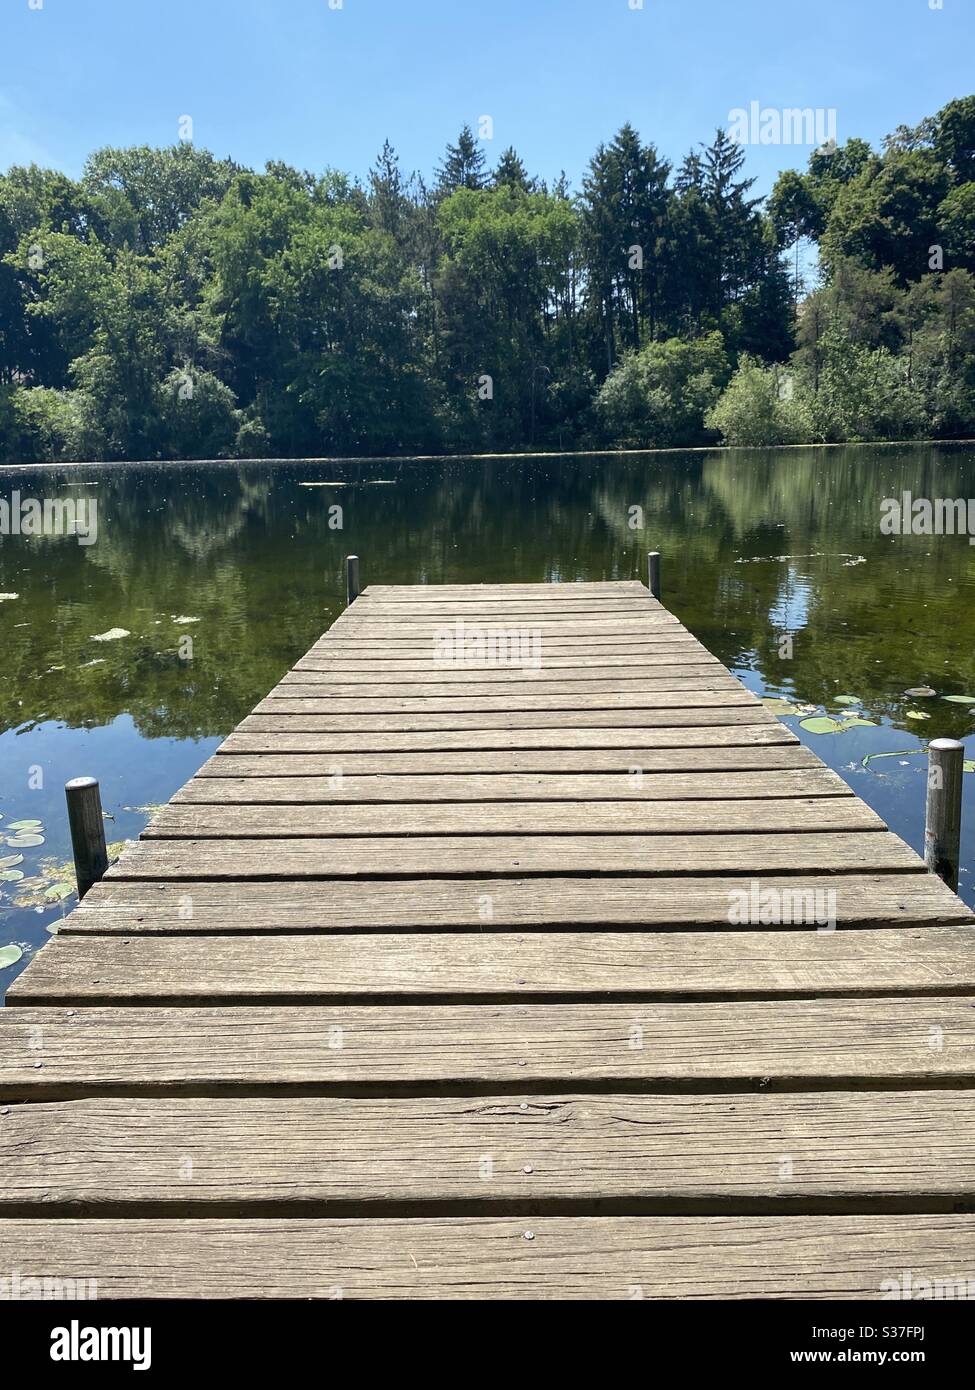 Wooden dock at lake surrounded by nature Stock Photo